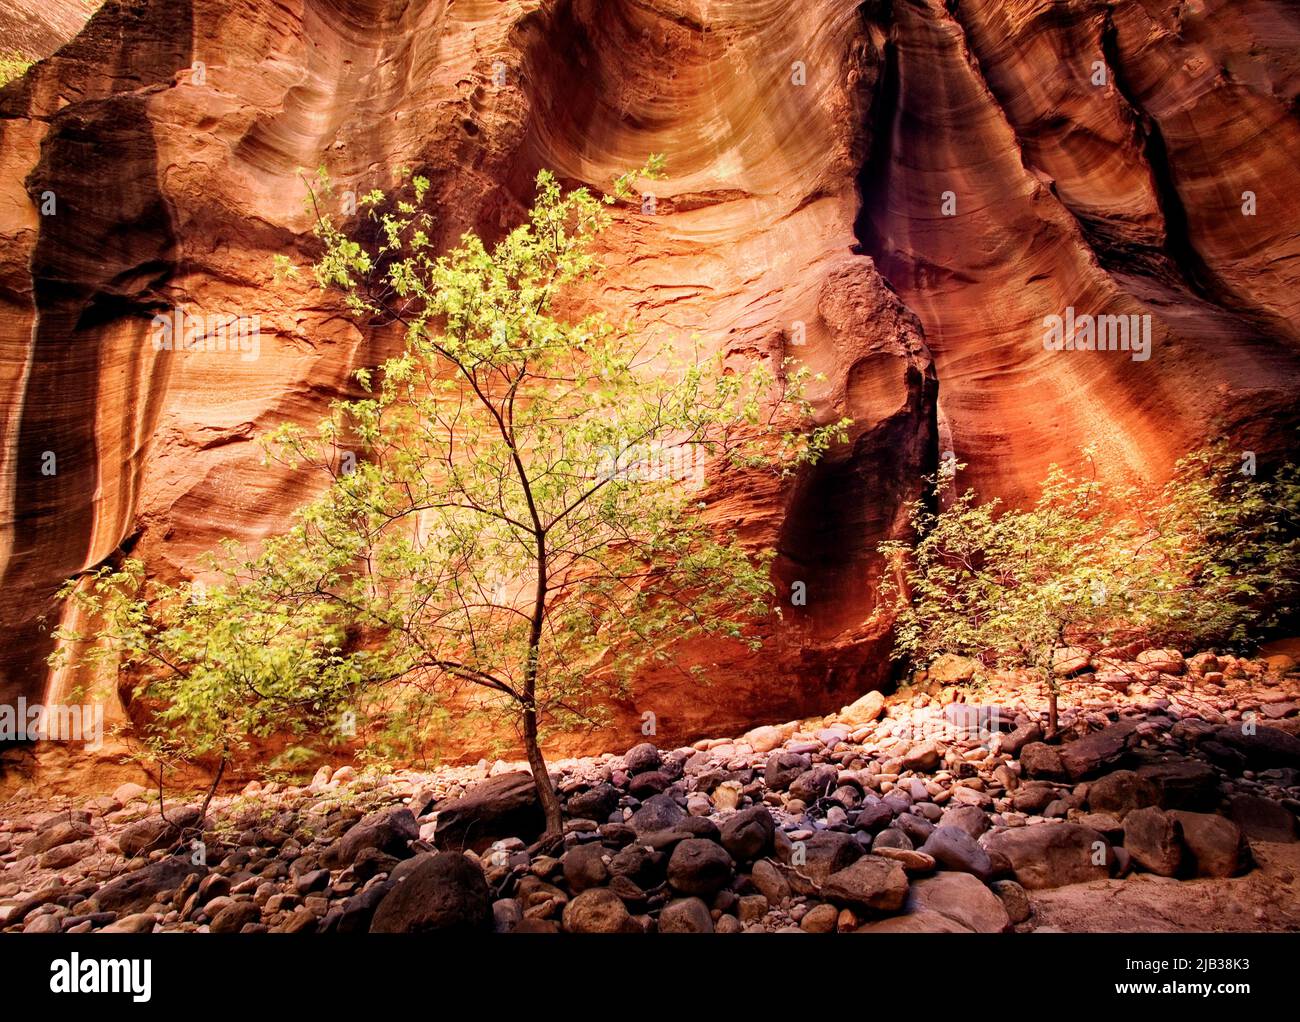 Tress displaying fall color stand out against the red rock of the Narrows in Zion National Park, Utah. Stock Photo